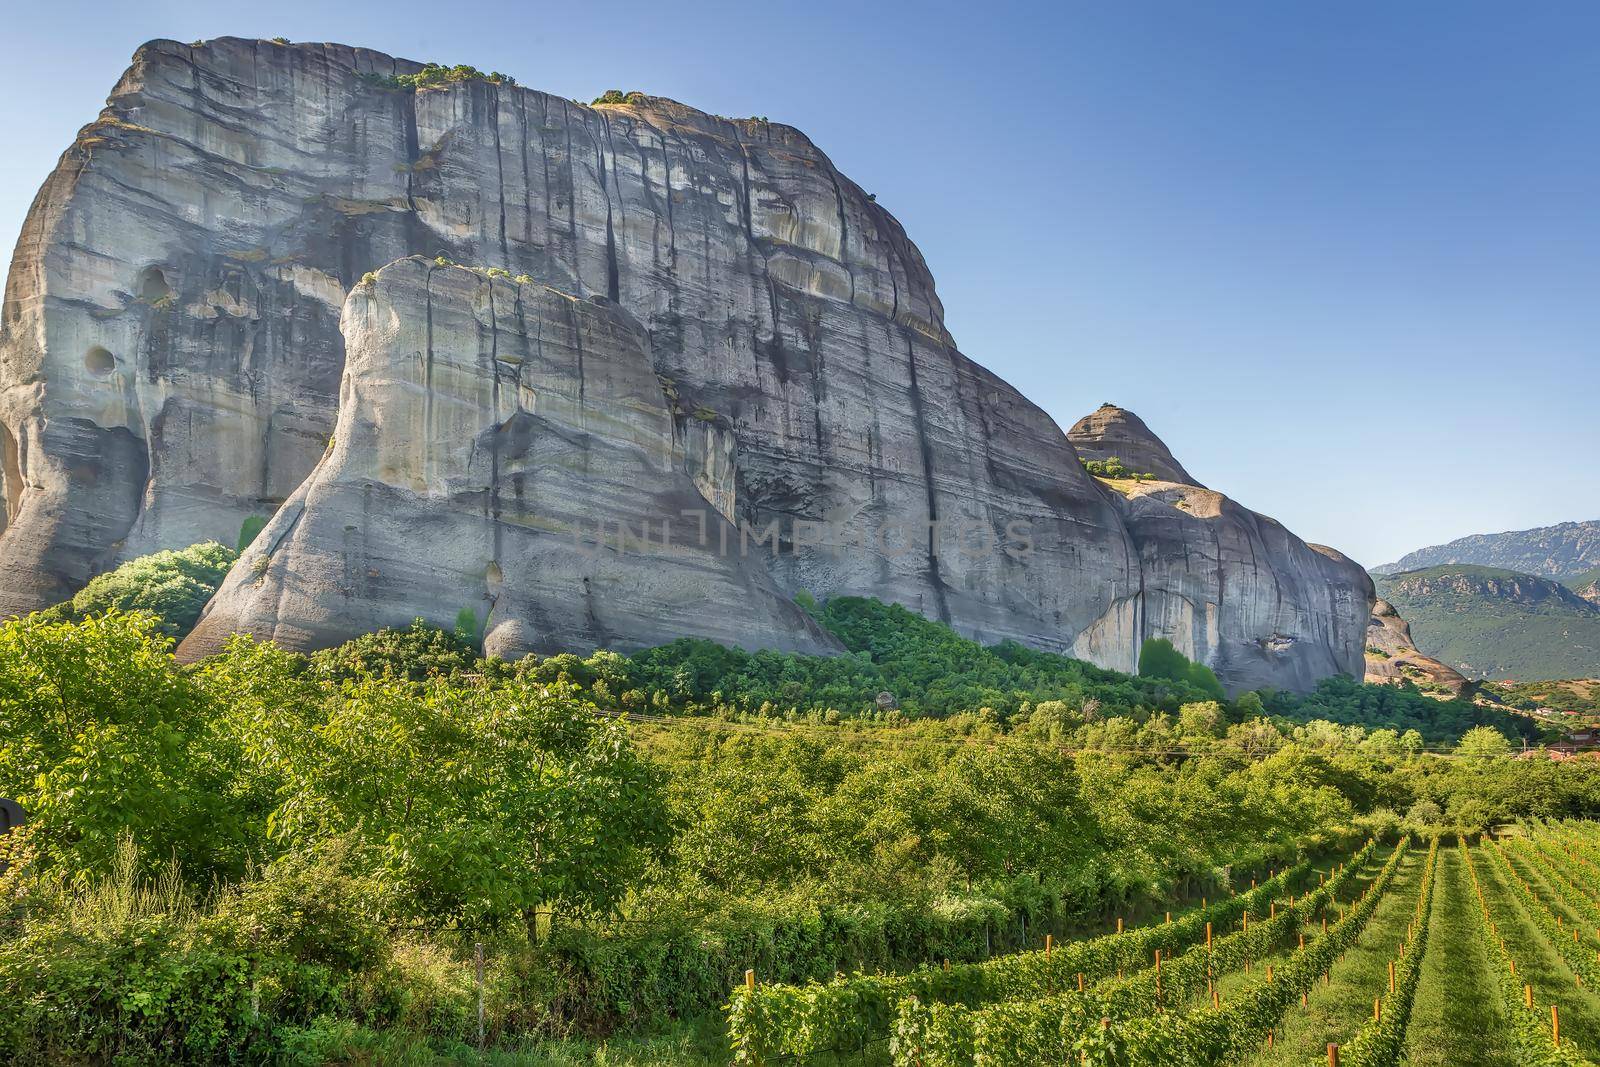 View of the vineyard and mountains in Meteora, Greece